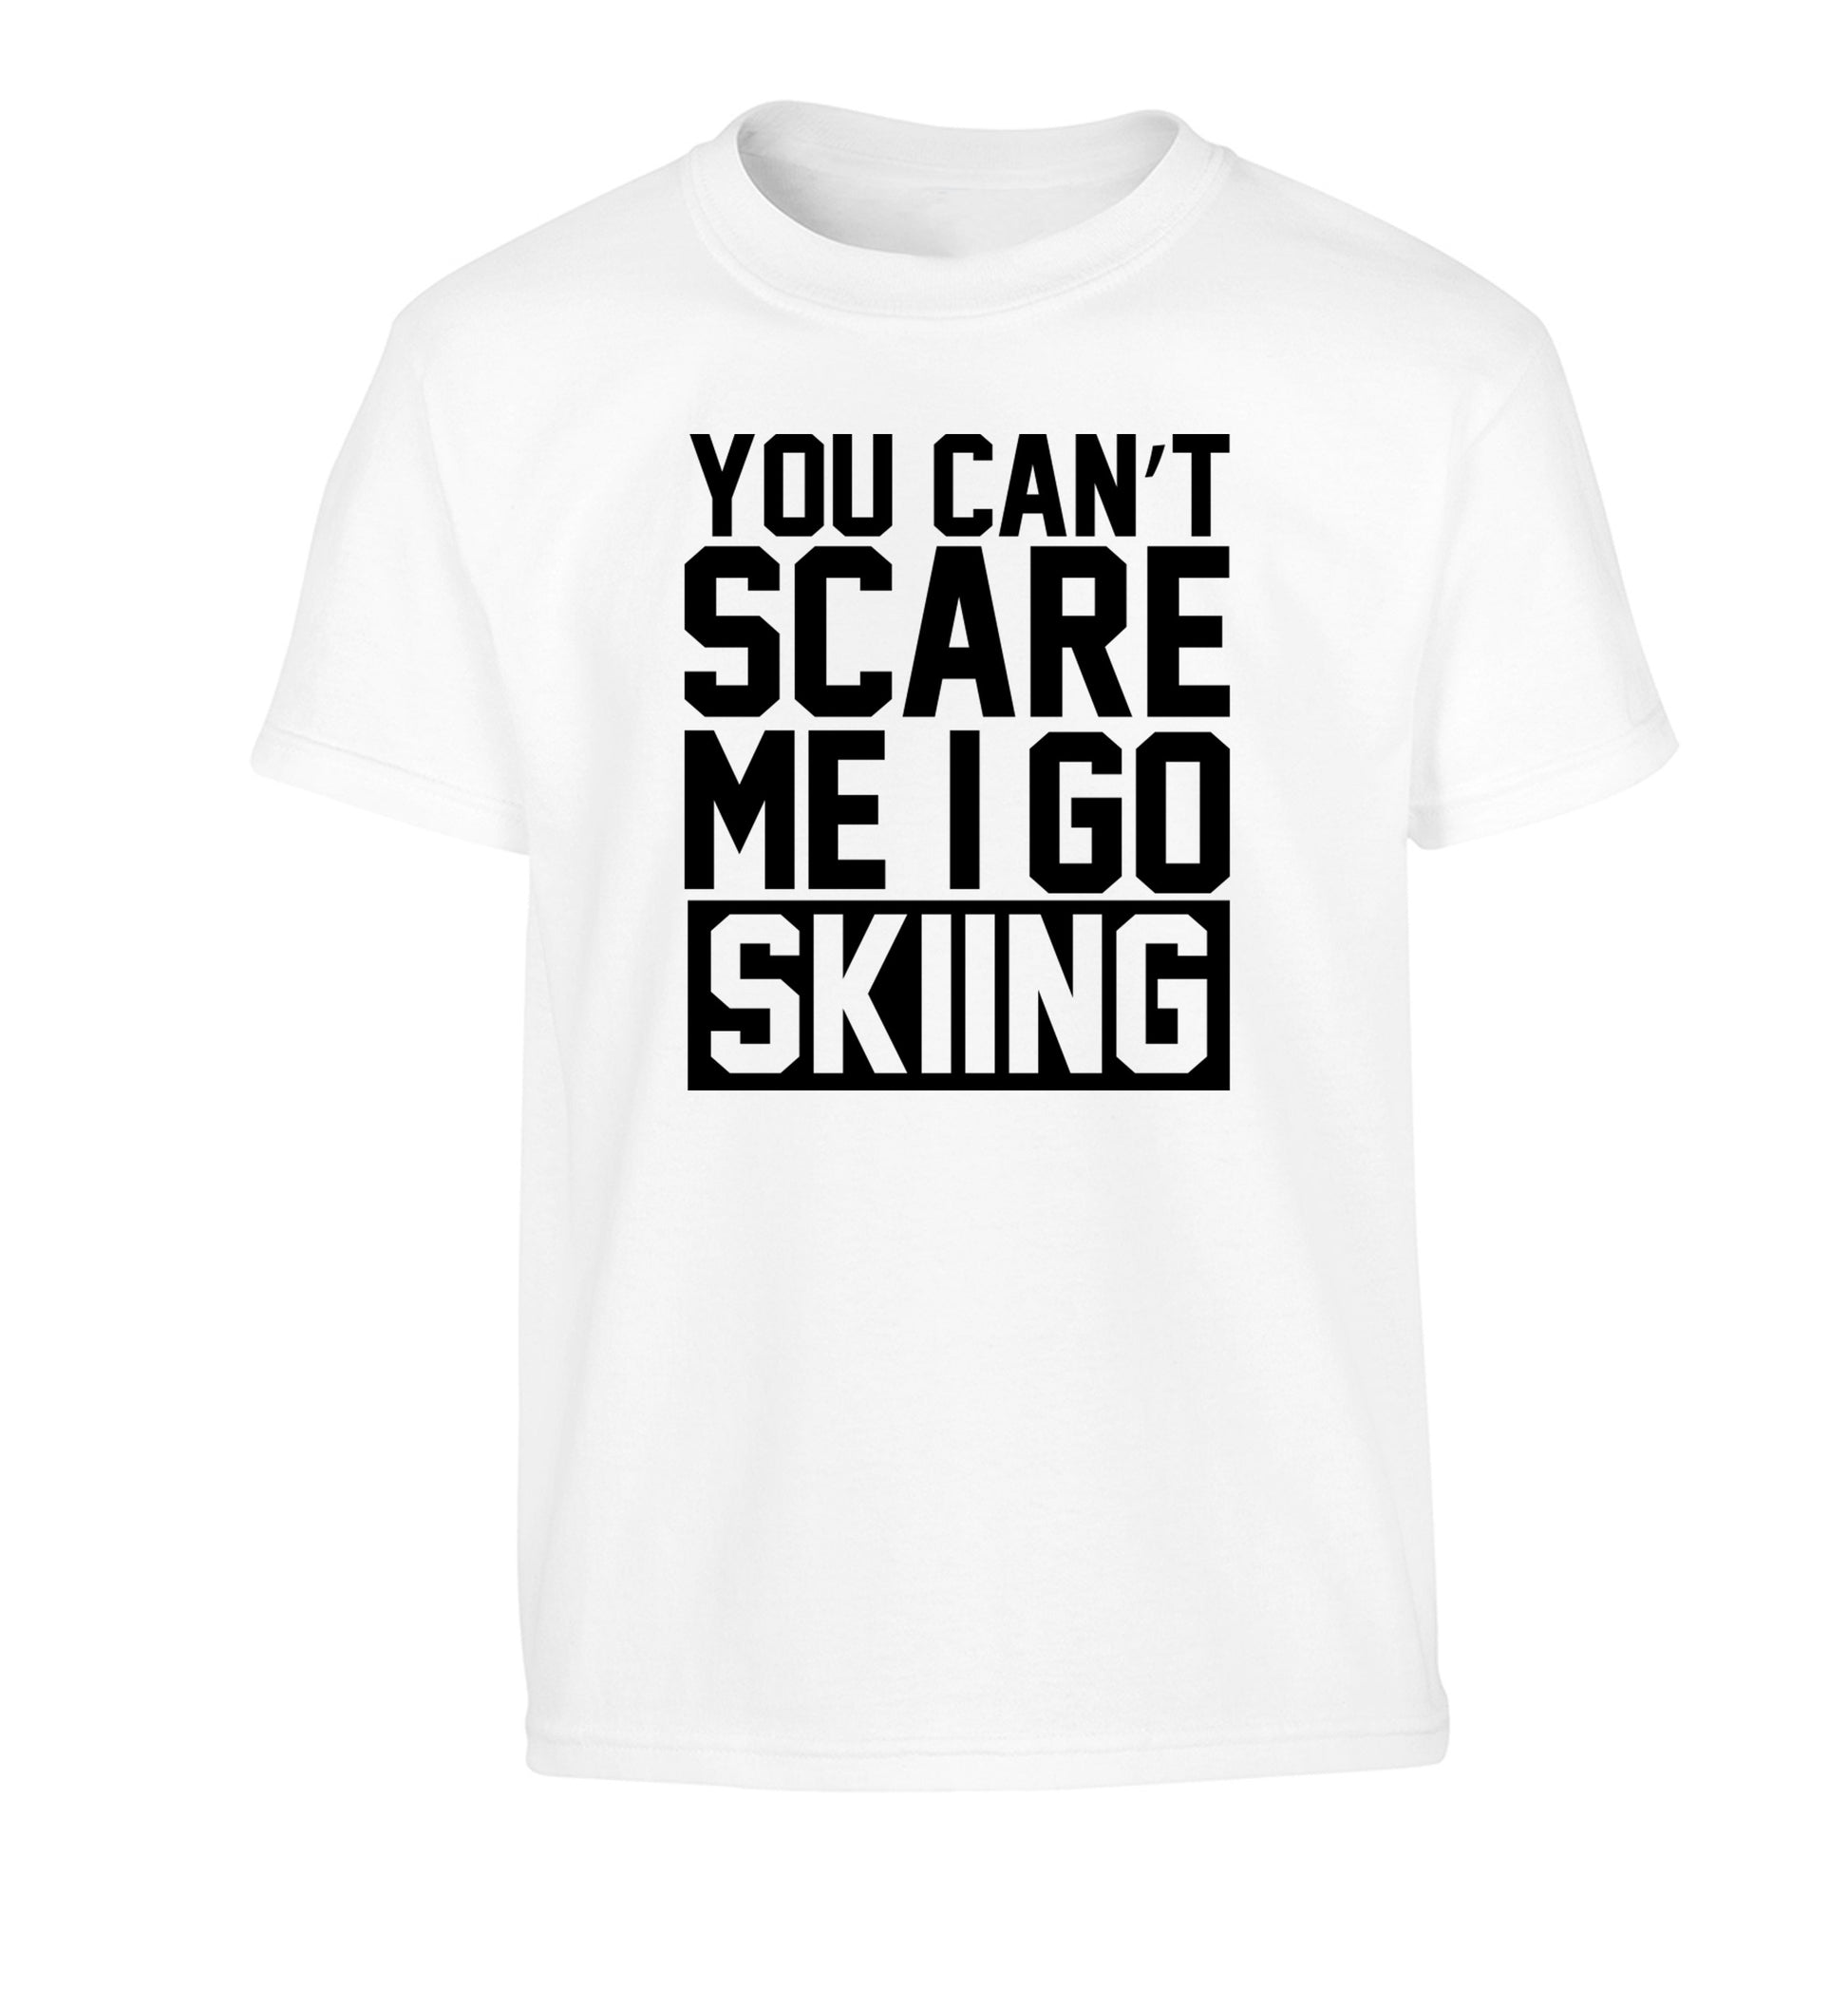 You can't scare me I go skiing Children's white Tshirt 12-14 Years